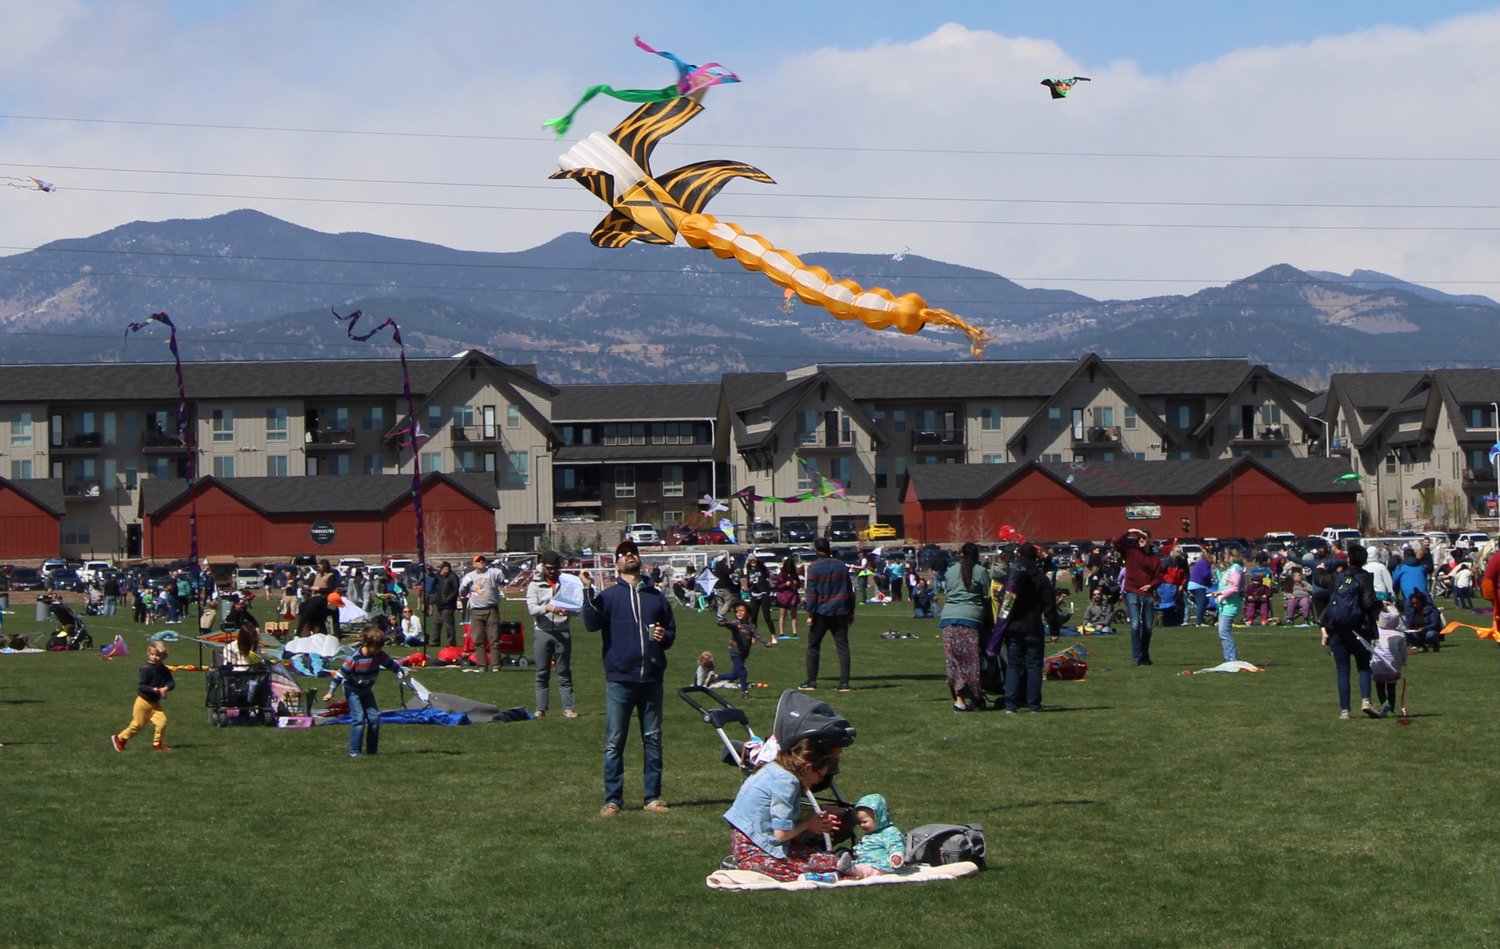 Arvada Kite Festival returns to Stenger Soccer Complex after twoyear